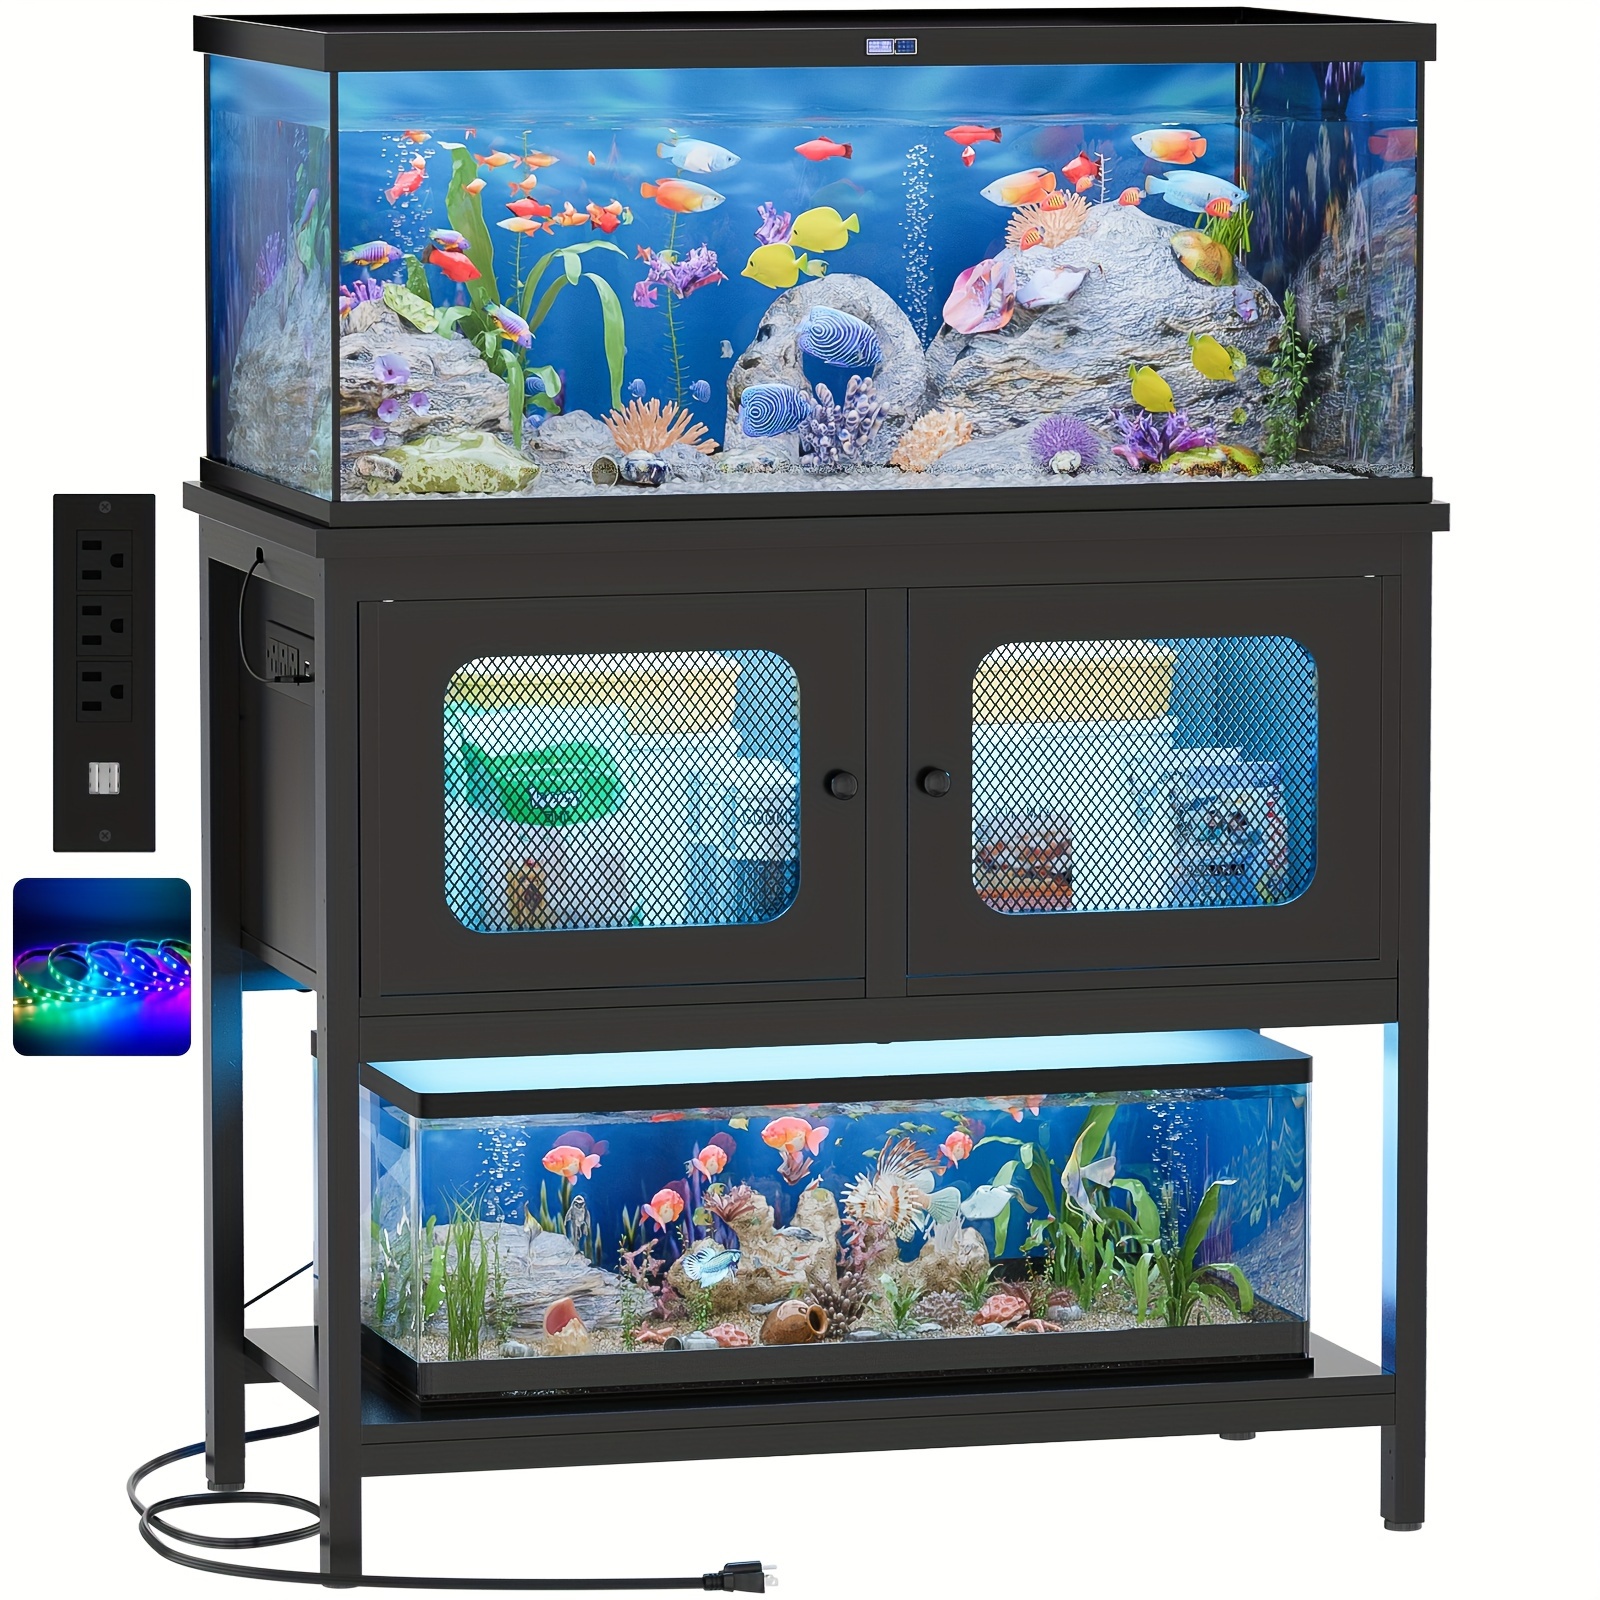 

Unikito 40 Gallon Fish Tank Stand With Led Light And Outlet, Metal Aquarium Stand With Cabinet And Accessories Storage, Reptile Tank Turtle Terrariums Table Stand Hold 880lbs And 2 Aquariums, Black